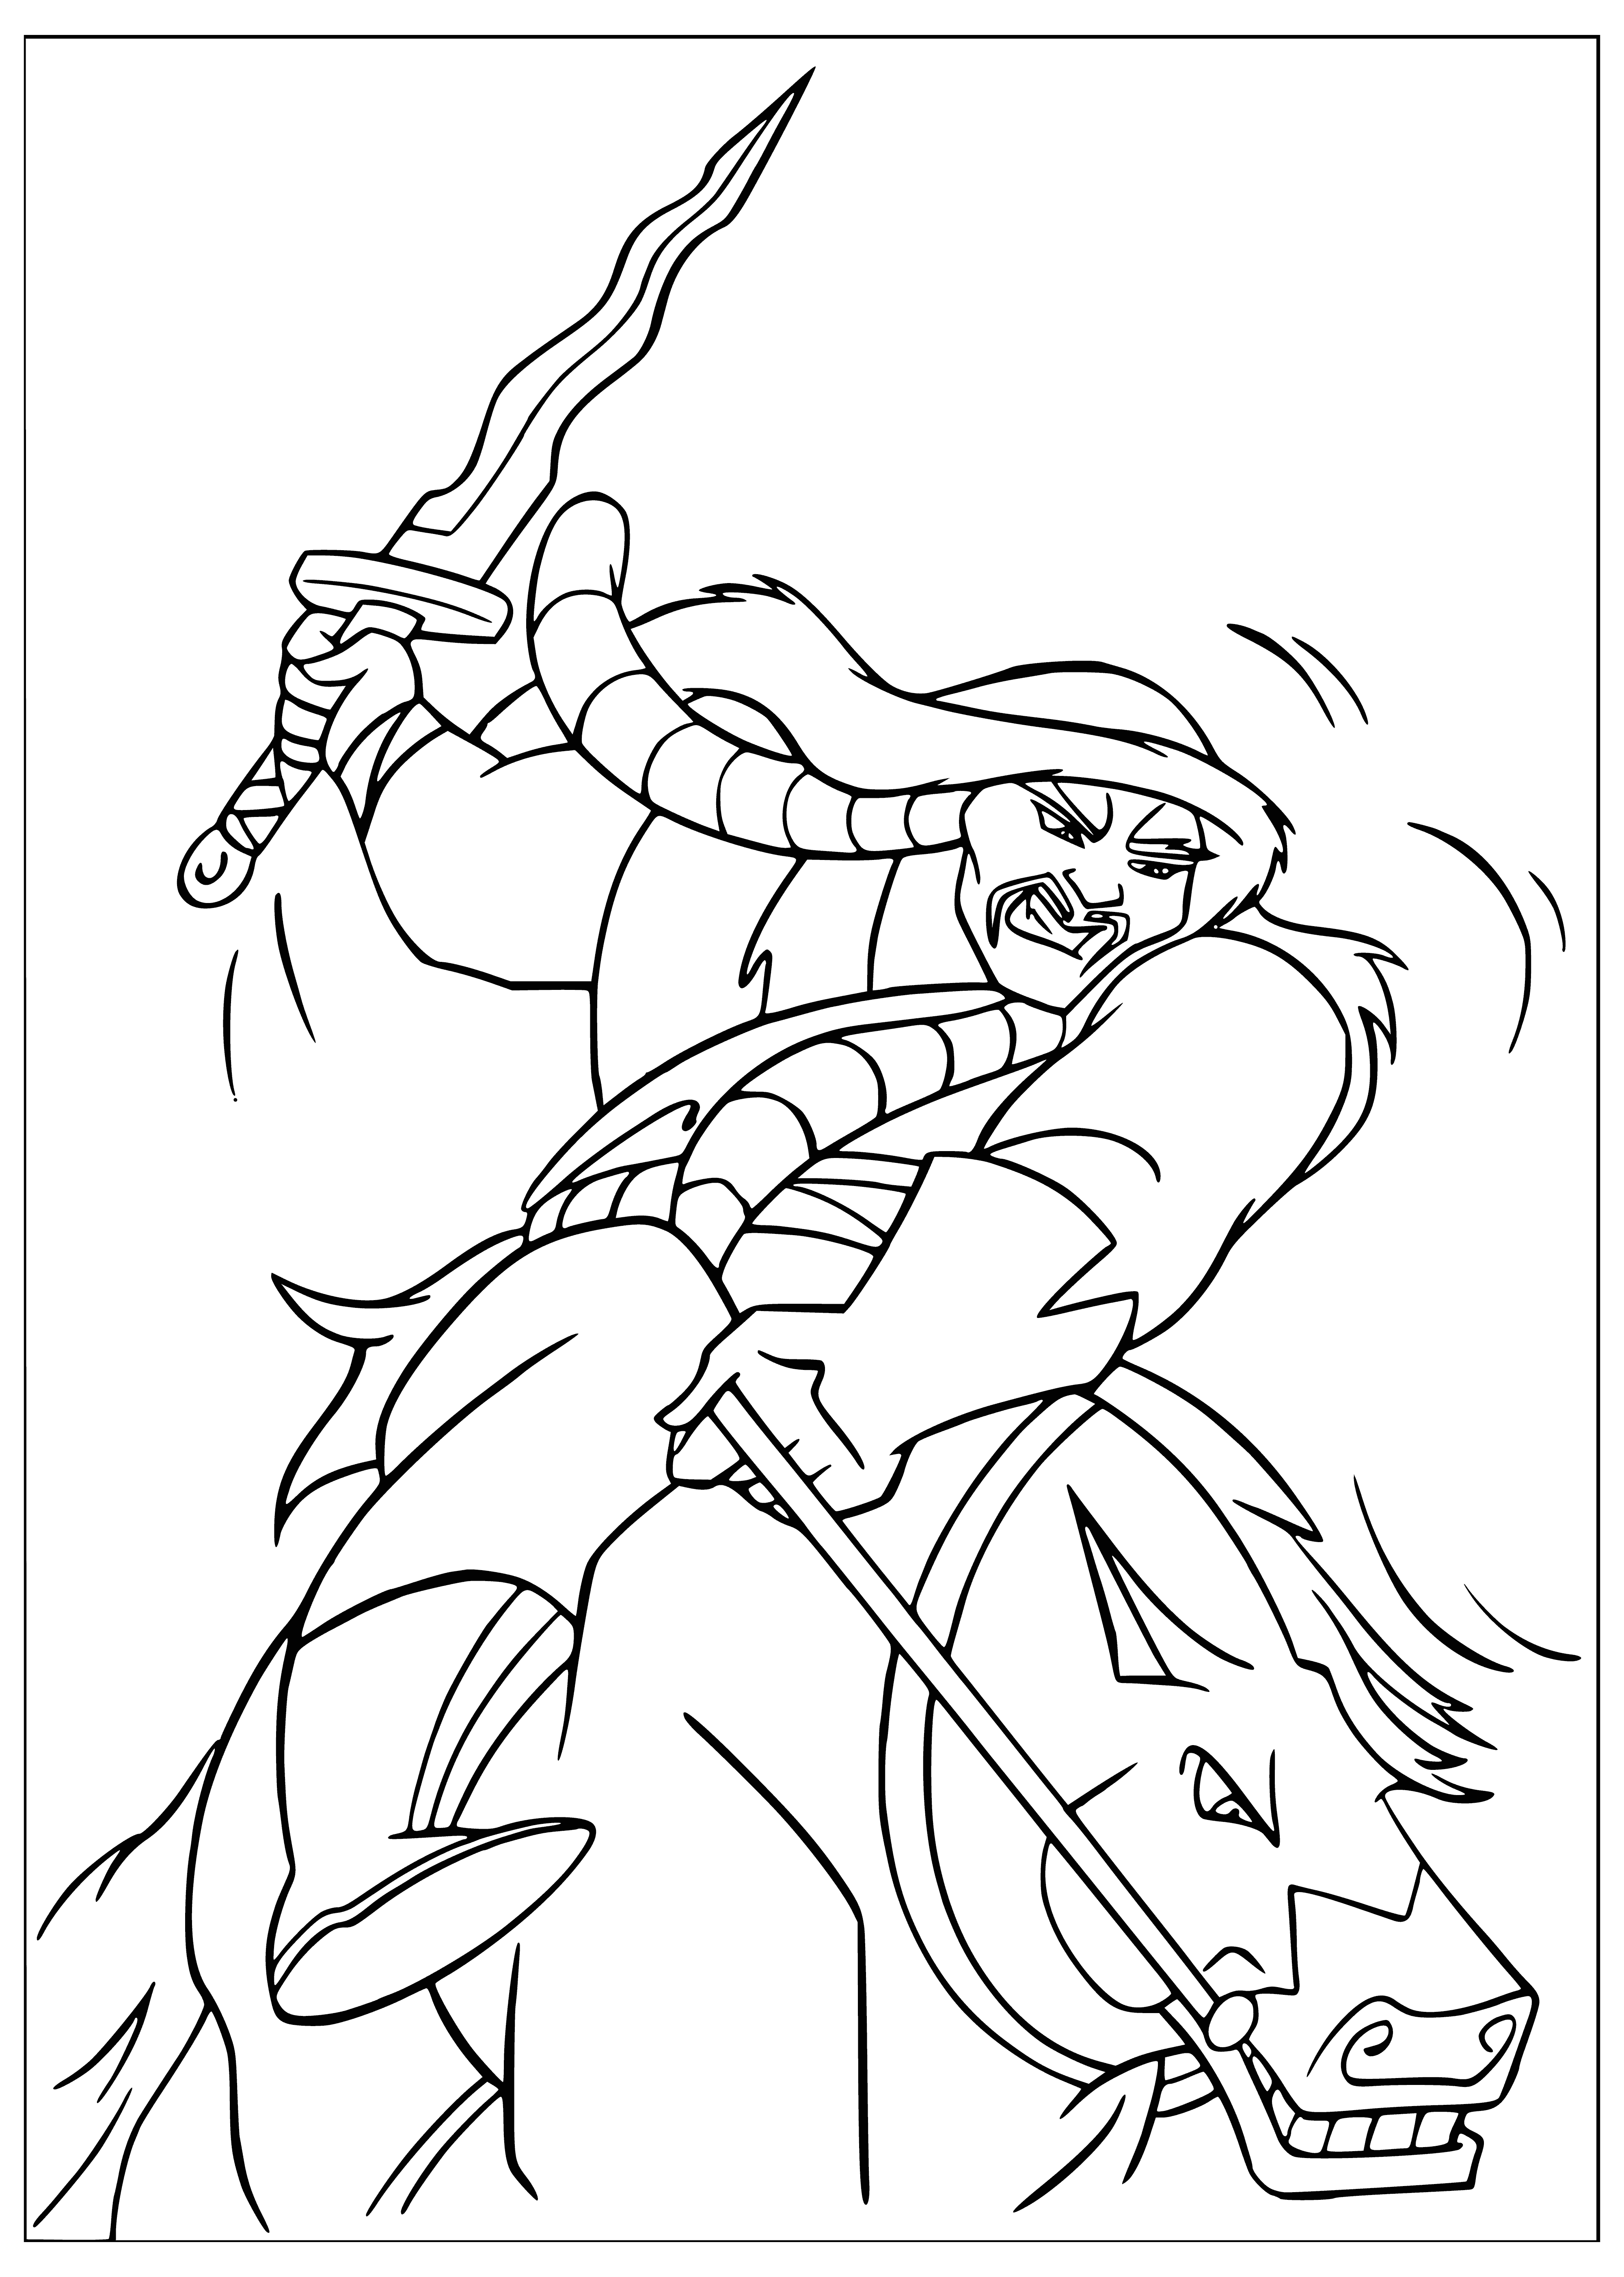 coloring page: Man in armor, poss. Shan-Yu, giving speech to men on horses. Sword strapped to his side.